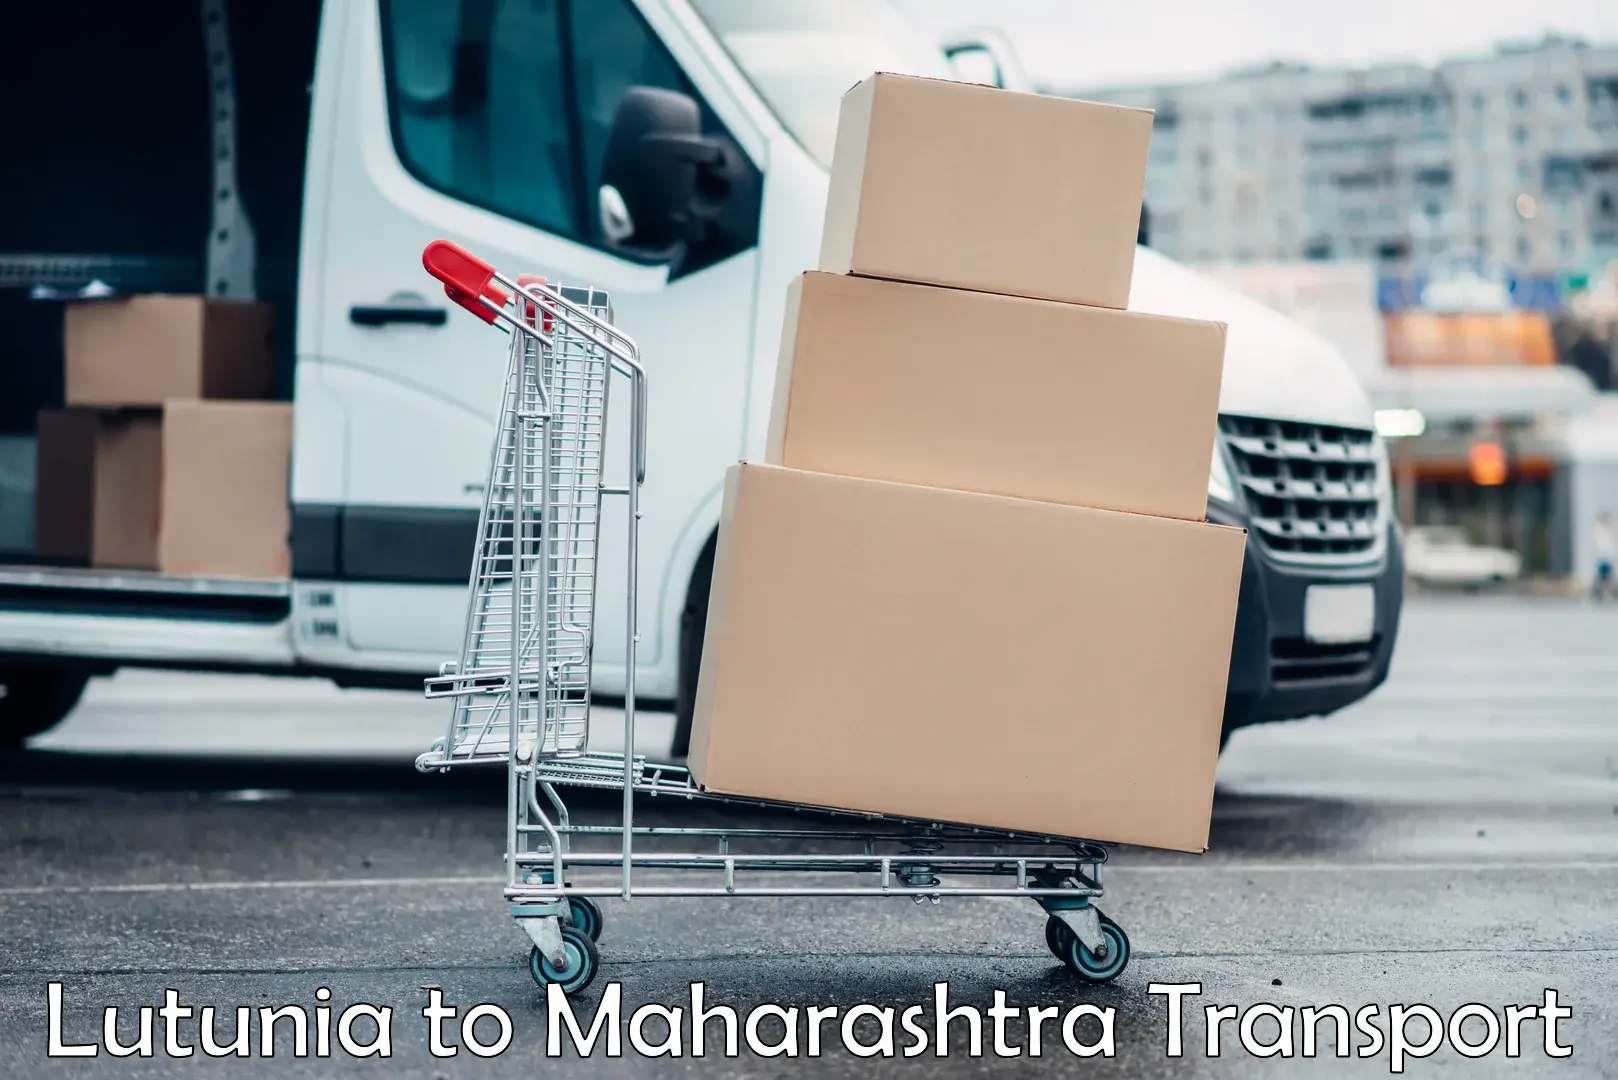 Vehicle transport services Lutunia to Sindhudurg